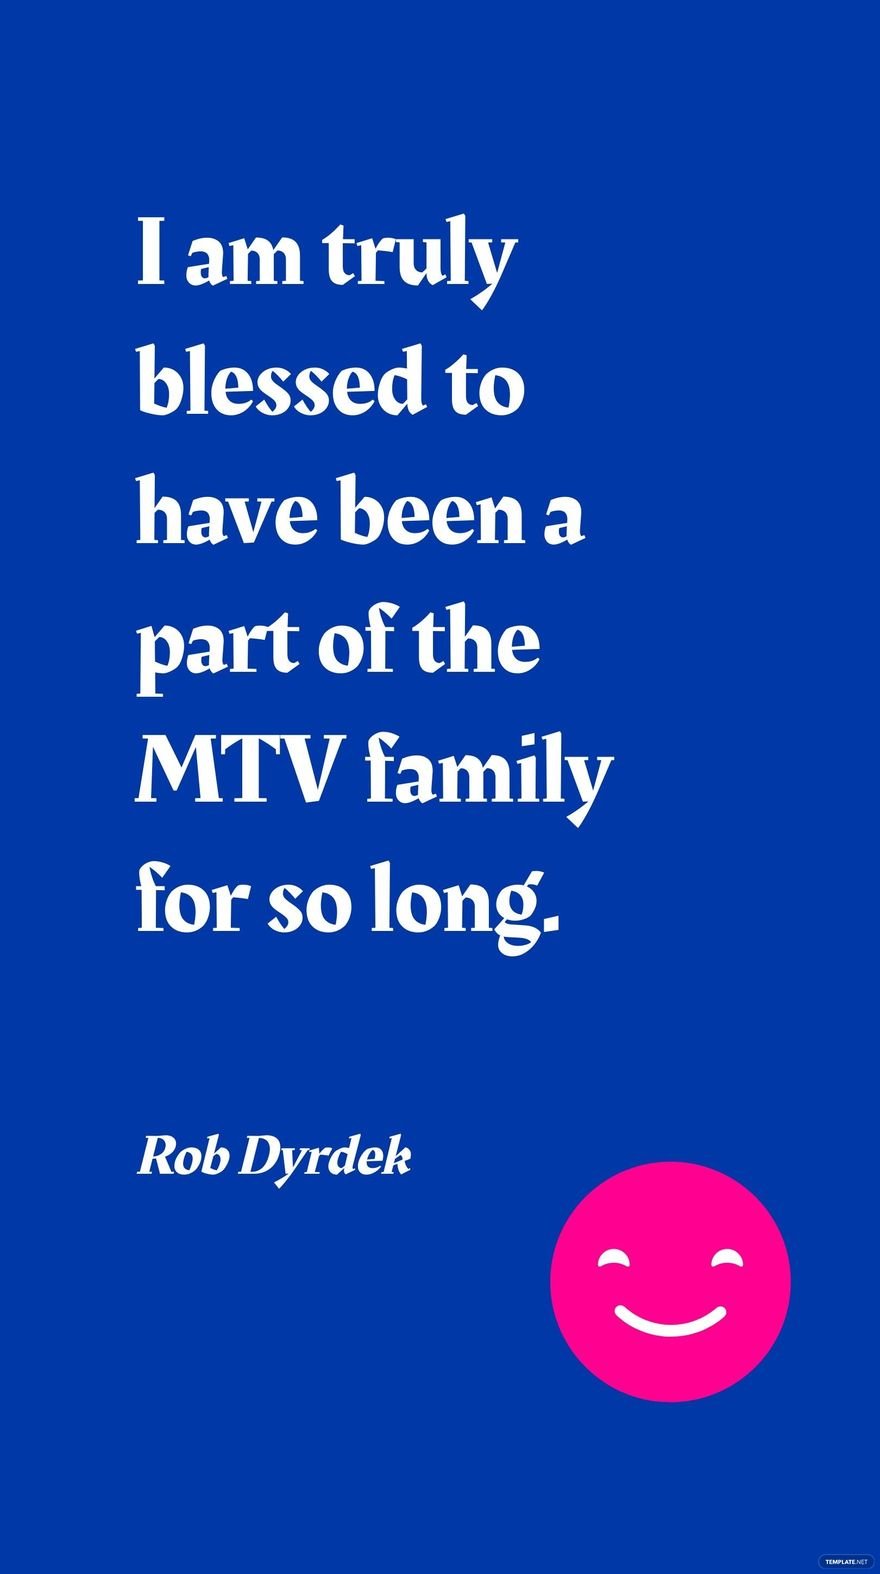 Rob Dyrdek - I am truly blessed to have been a part of the MTV family for so long.